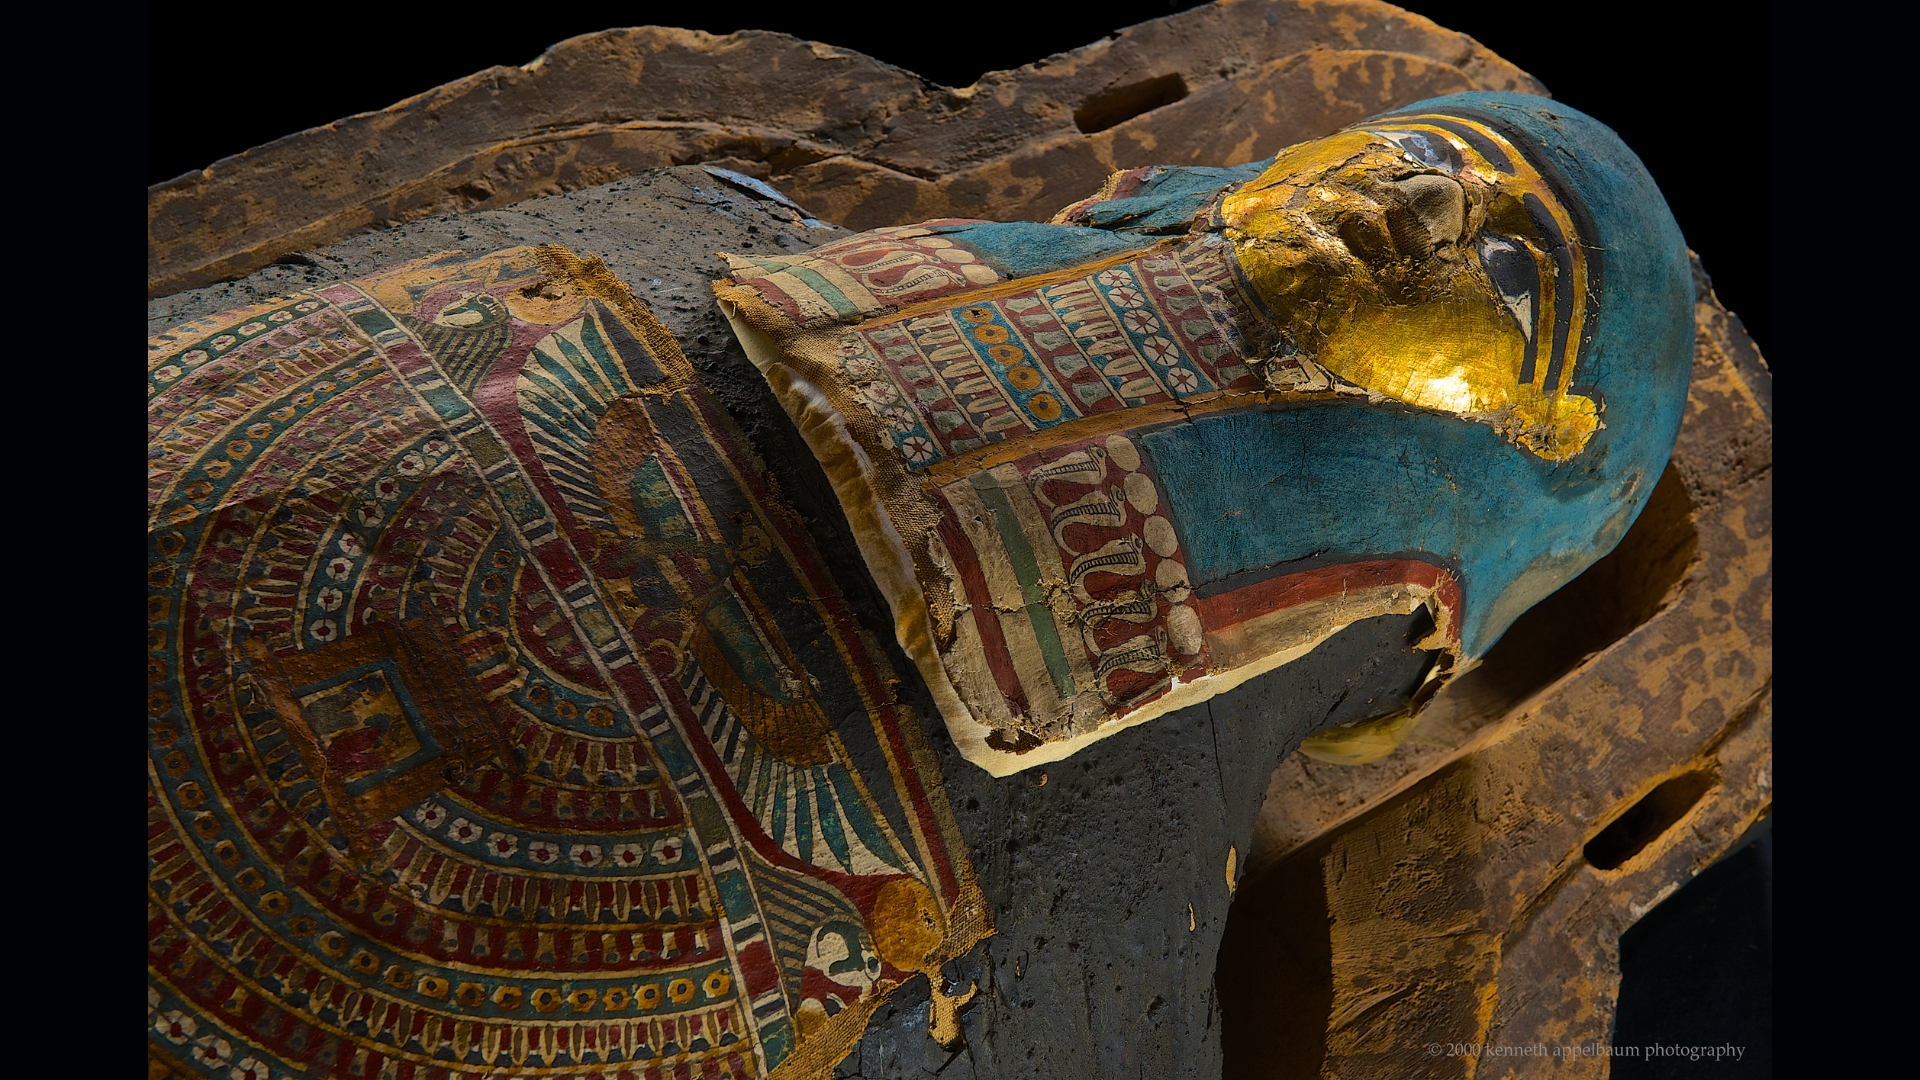 Image of sarcophagus from Mummies of the World: Exhibition featured at the Discovery Center of Idaho.